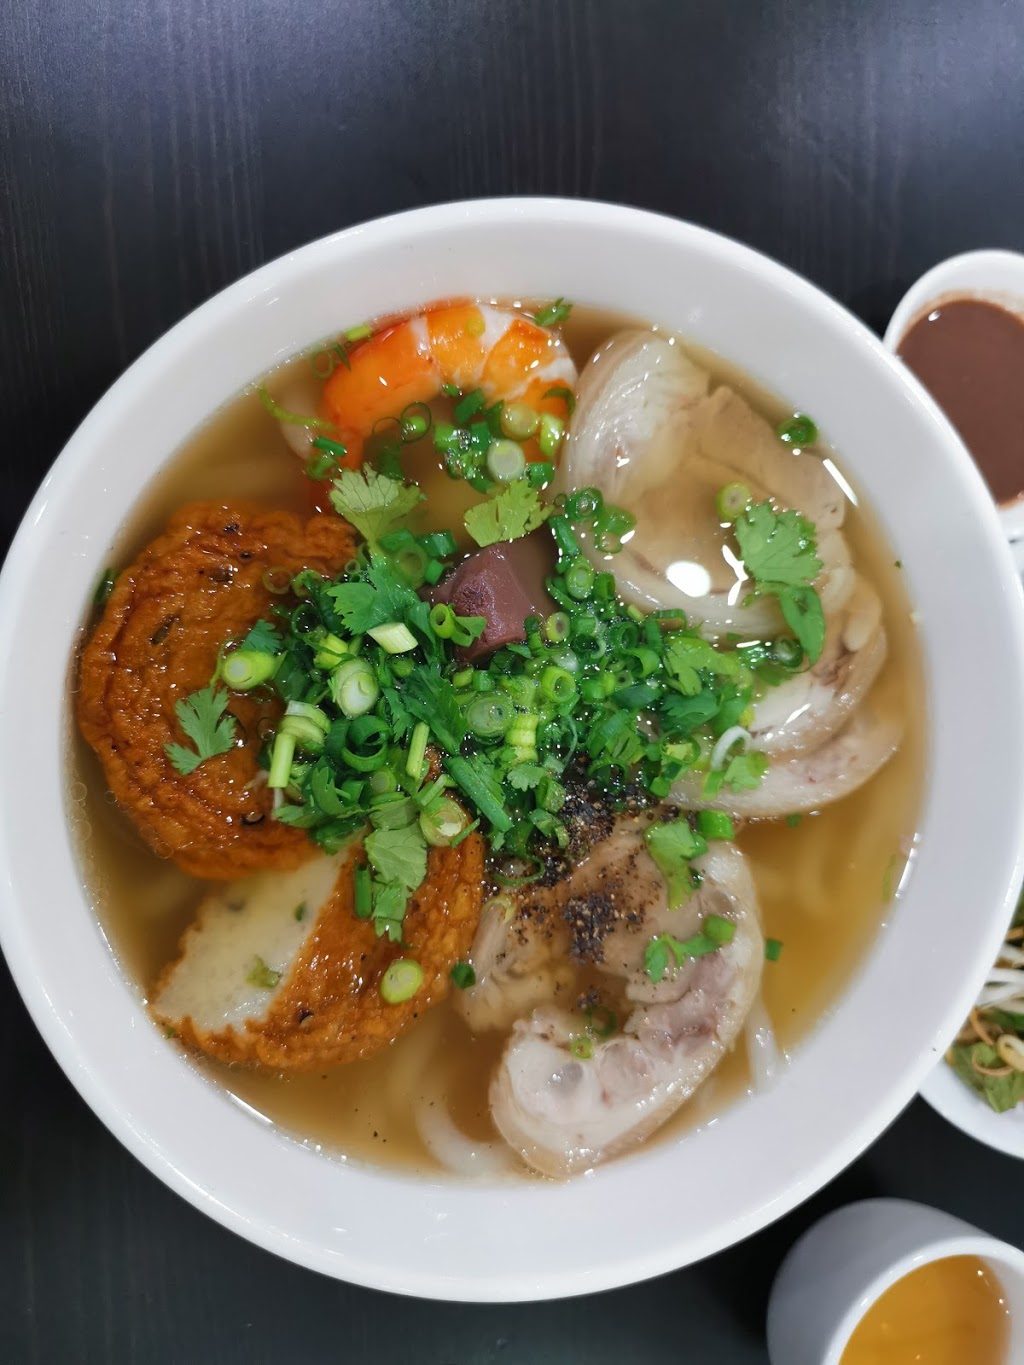 Thanh Xuan | restaurant | 17 Canley Vale Rd, Canley Vale NSW 2166, Australia | 0297232786 OR +61 2 9723 2786